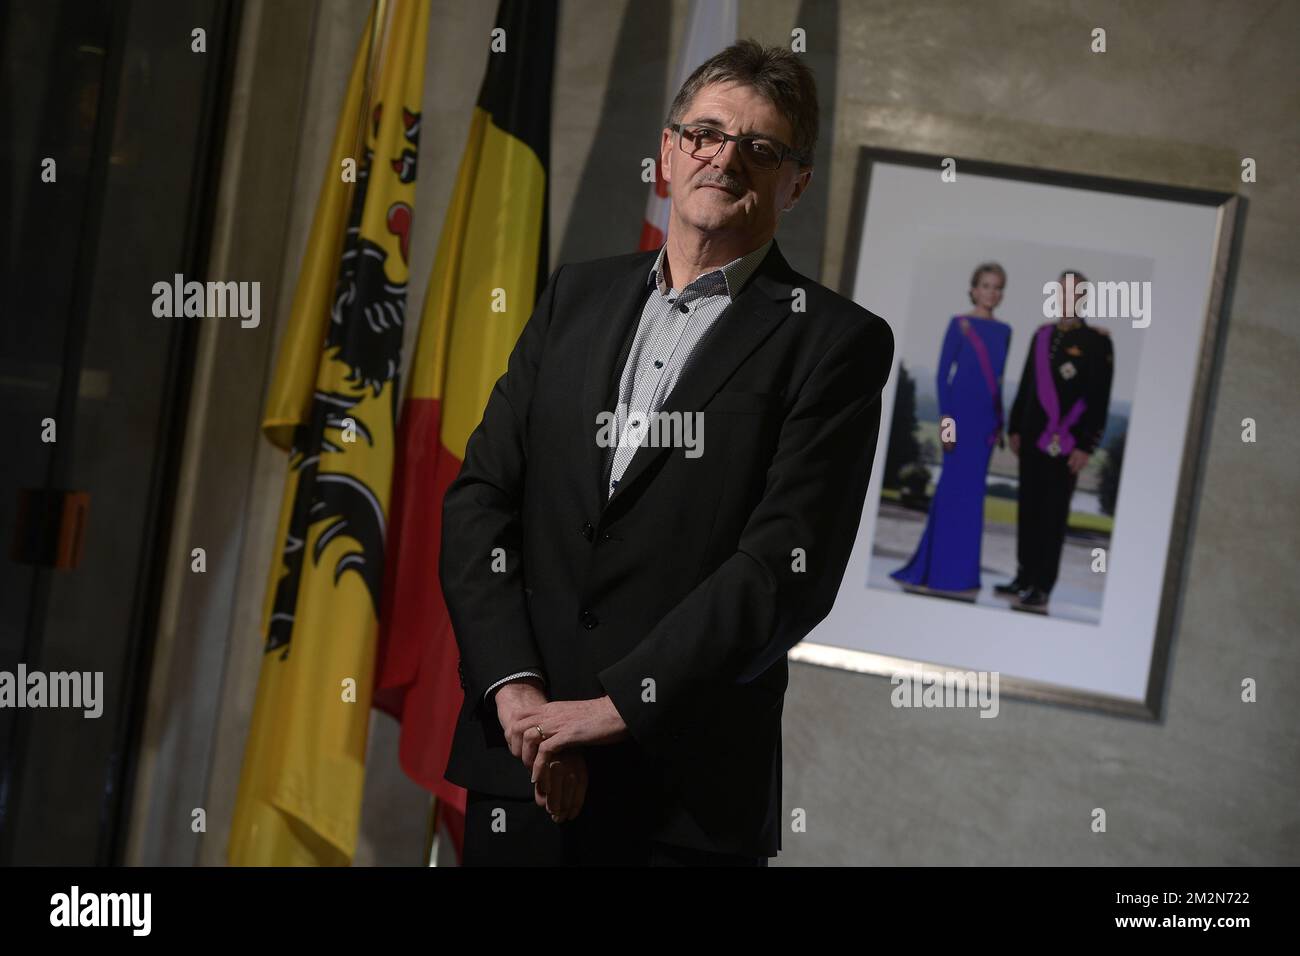 Future Herstappe mayor Leon Lowet poses for the photographer after an oath taking ceremony for the future mayors of several cities in the Limburg province, Wednesday 19 December 2018 in Hasselt. BELGA PHOTO YORICK JANSENS Stock Photo